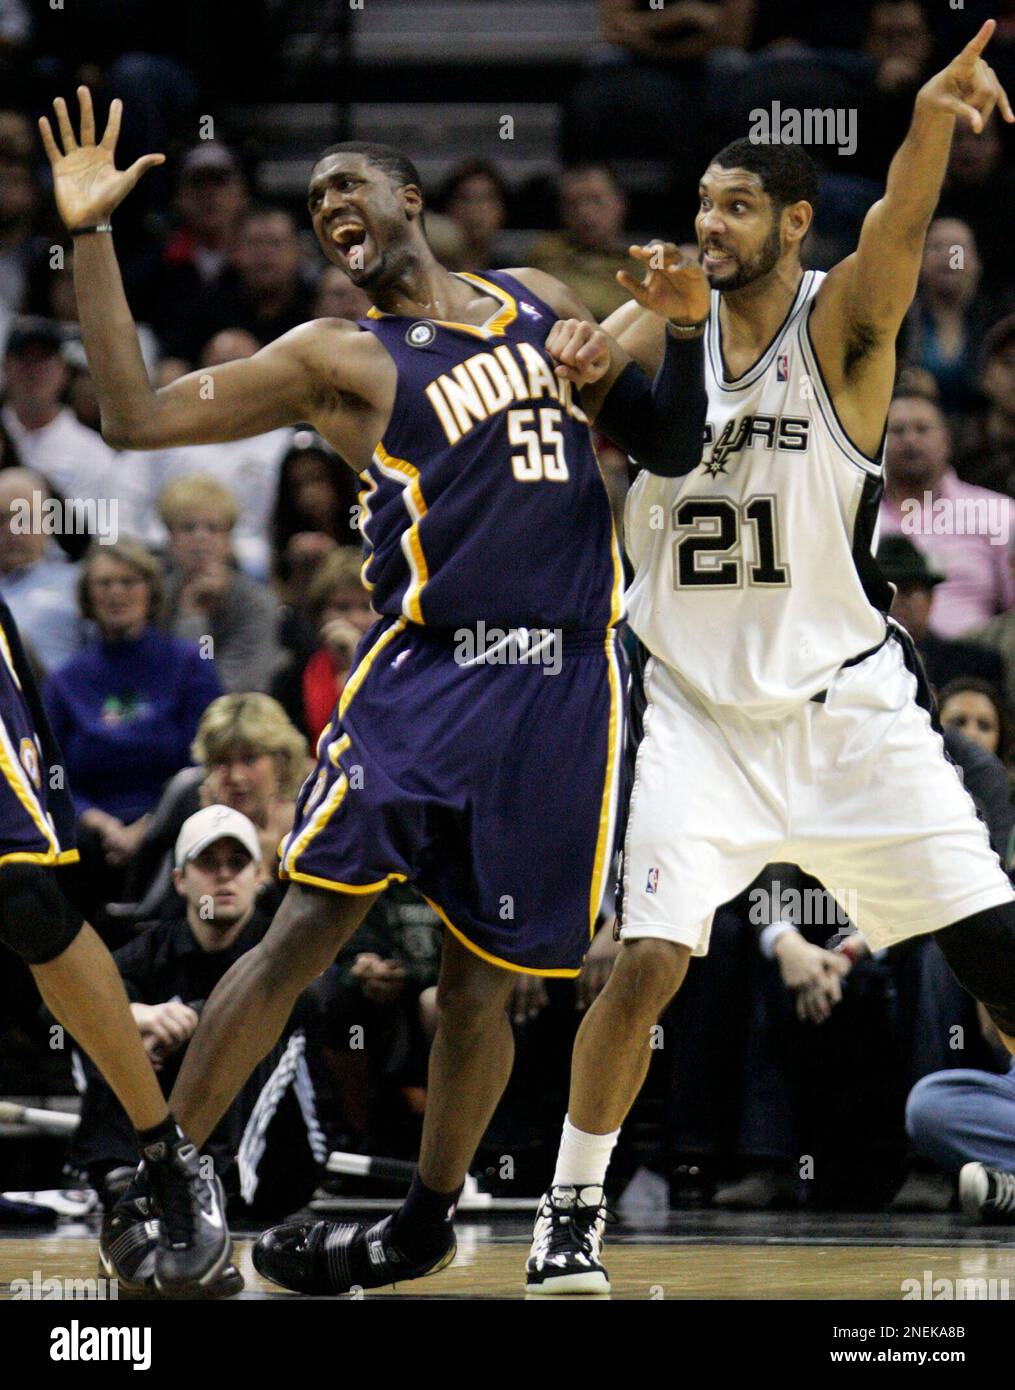 Indiana Hibbert and San Antonio Spurs' Tim Duncan for position during the second half of an NBA basketball game in San Saturday, Dec. 19, 2009. (AP Photo/Delcia Lopez